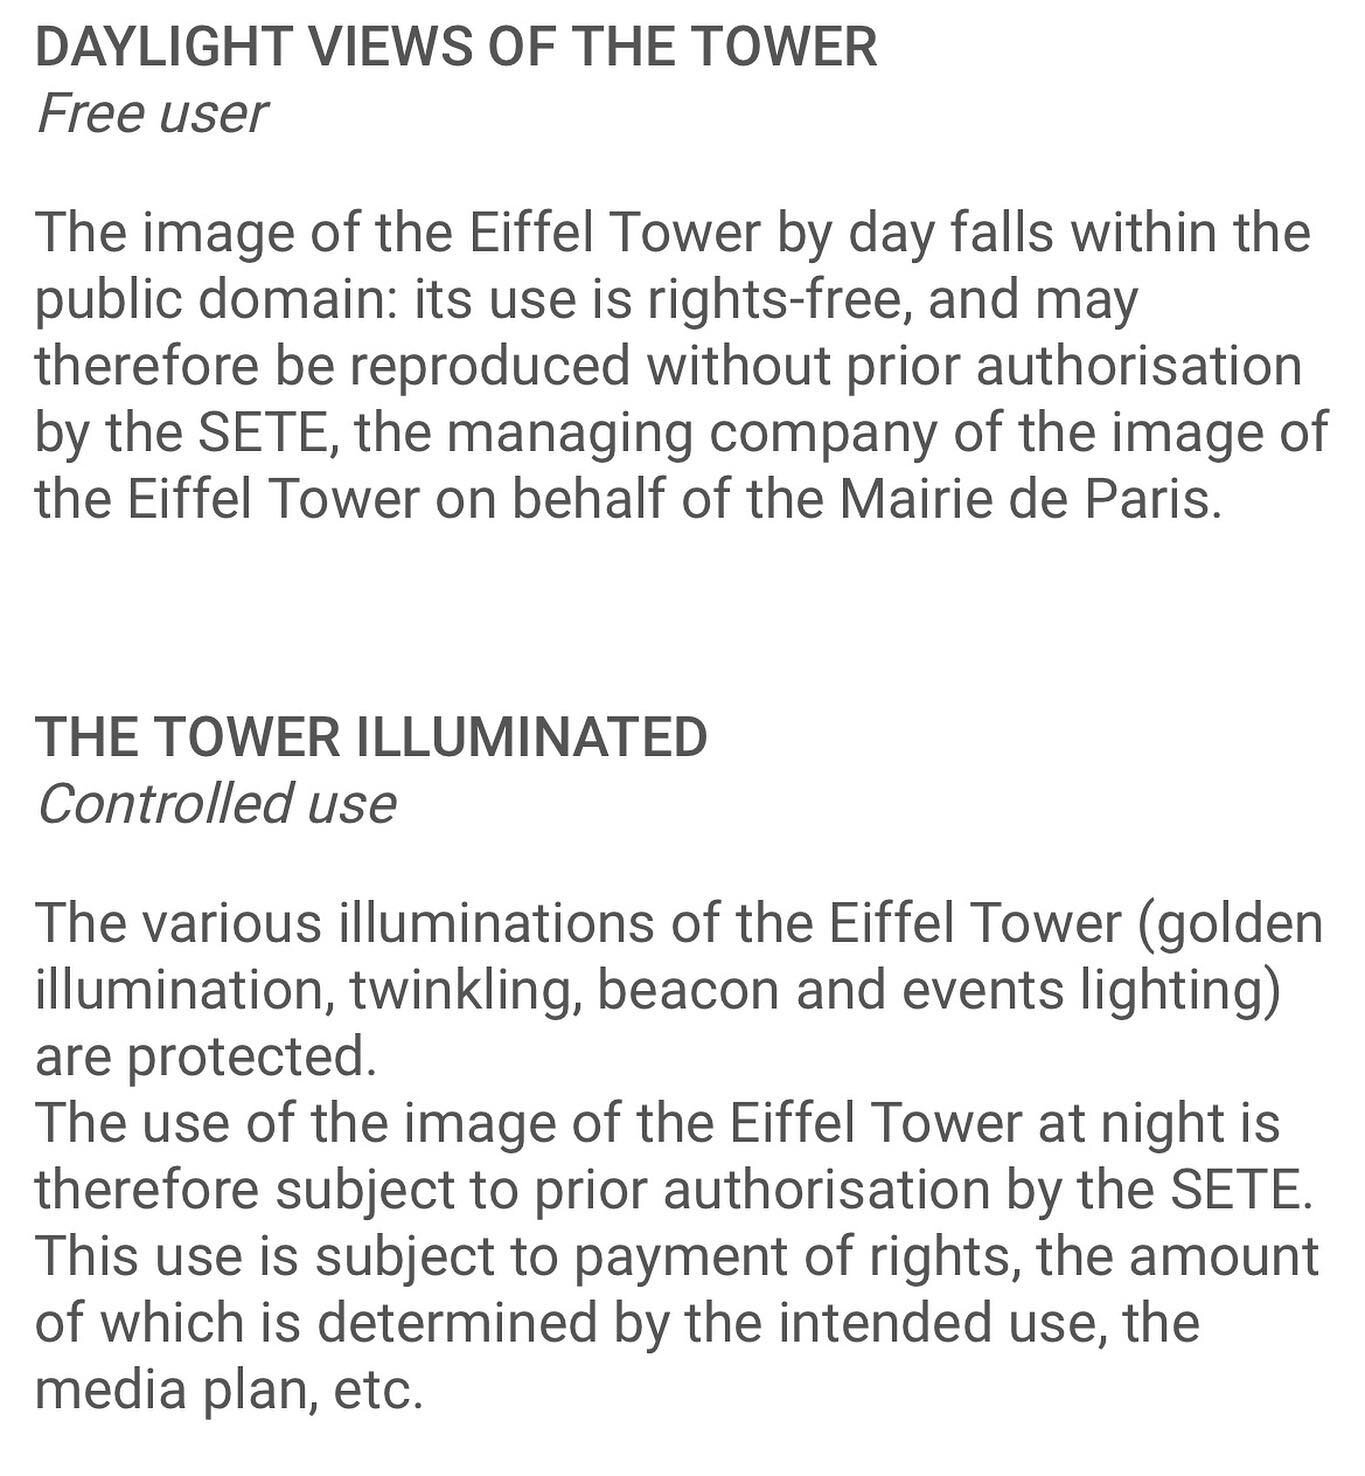 Fun fact: The nighttime illuminations of the Eiffel Tower are protected by #copyright. Images/views taken by private individuals for private use is OK, but professionals need to seek permission and may be subject to a fee. #eiffeltower #IPfunfacts

C